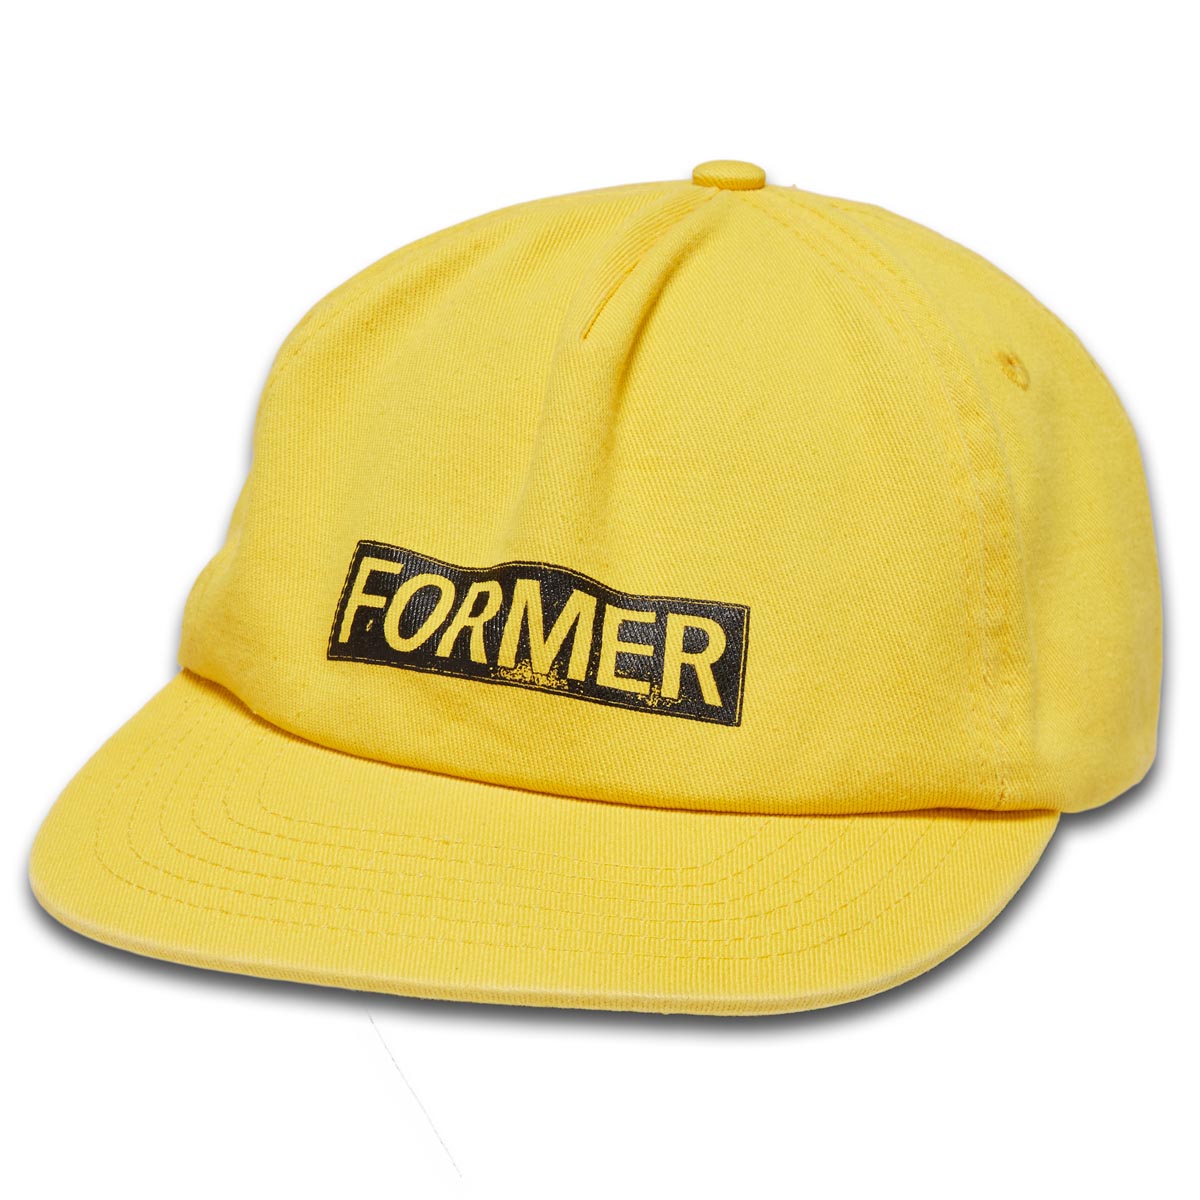 Former Legacy Plate Hat - Mustard image 1